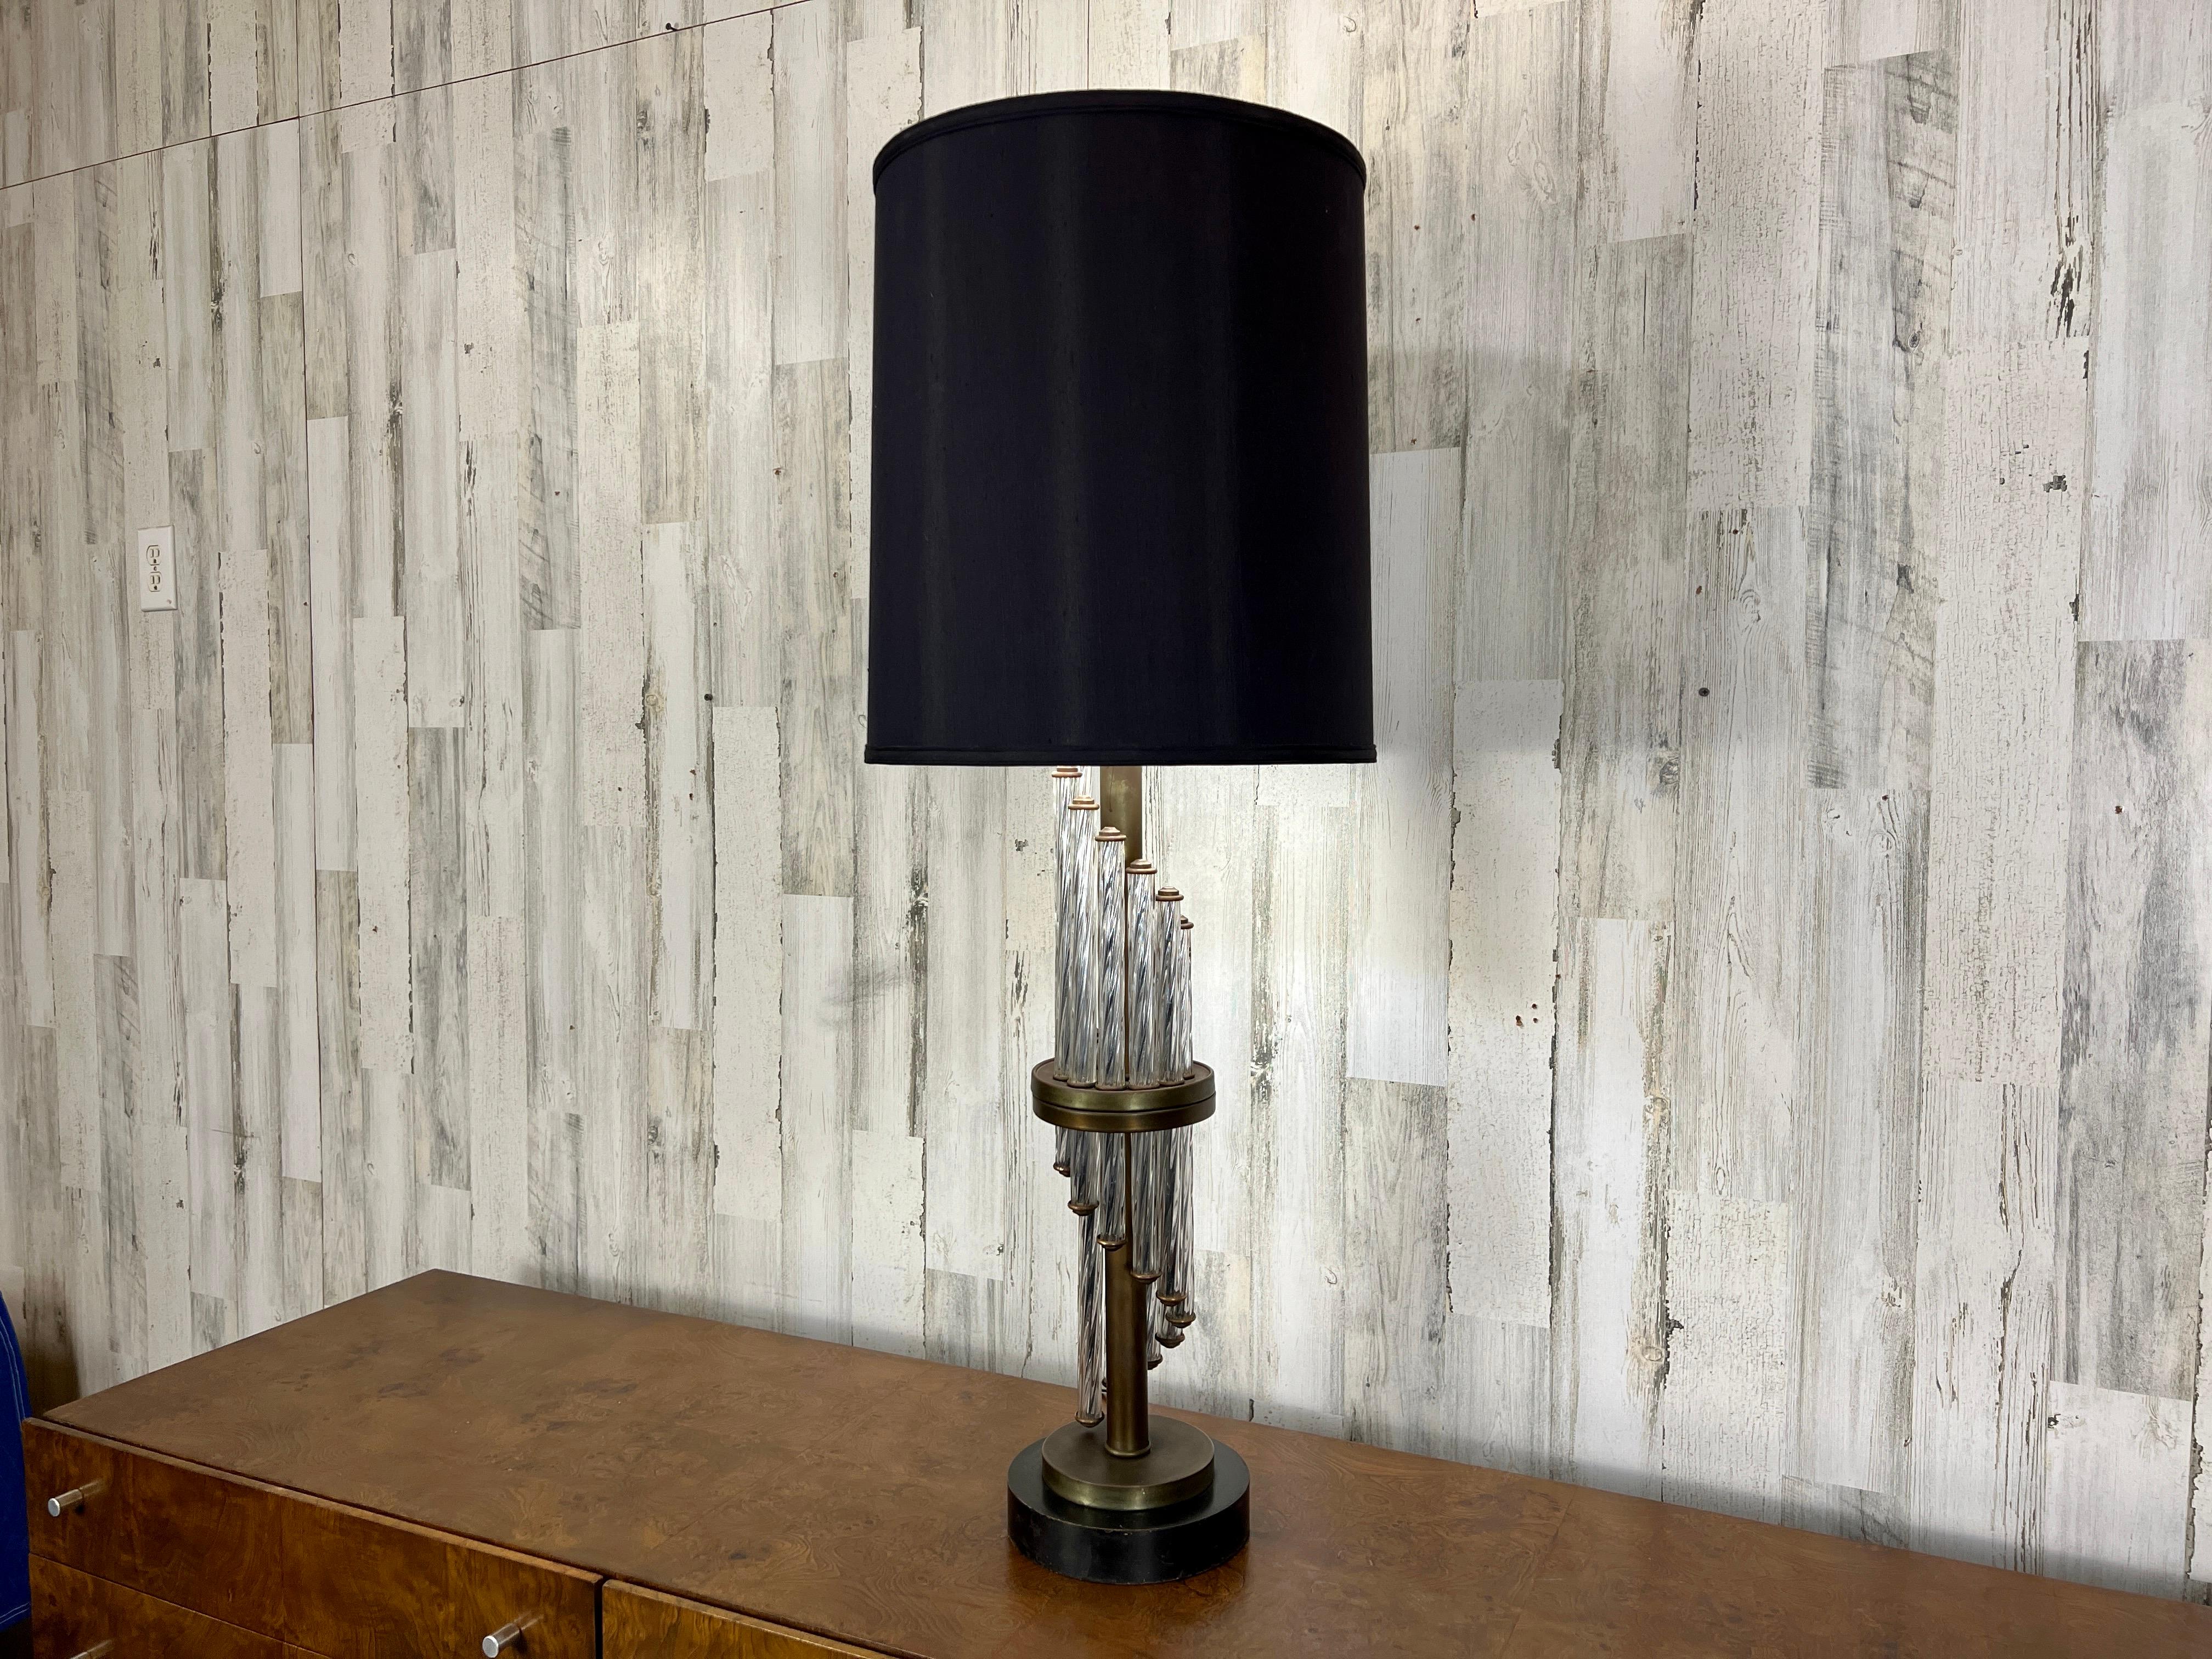 Modernist Spiral Glass and Bronze Table Lamp In Good Condition For Sale In Denton, TX